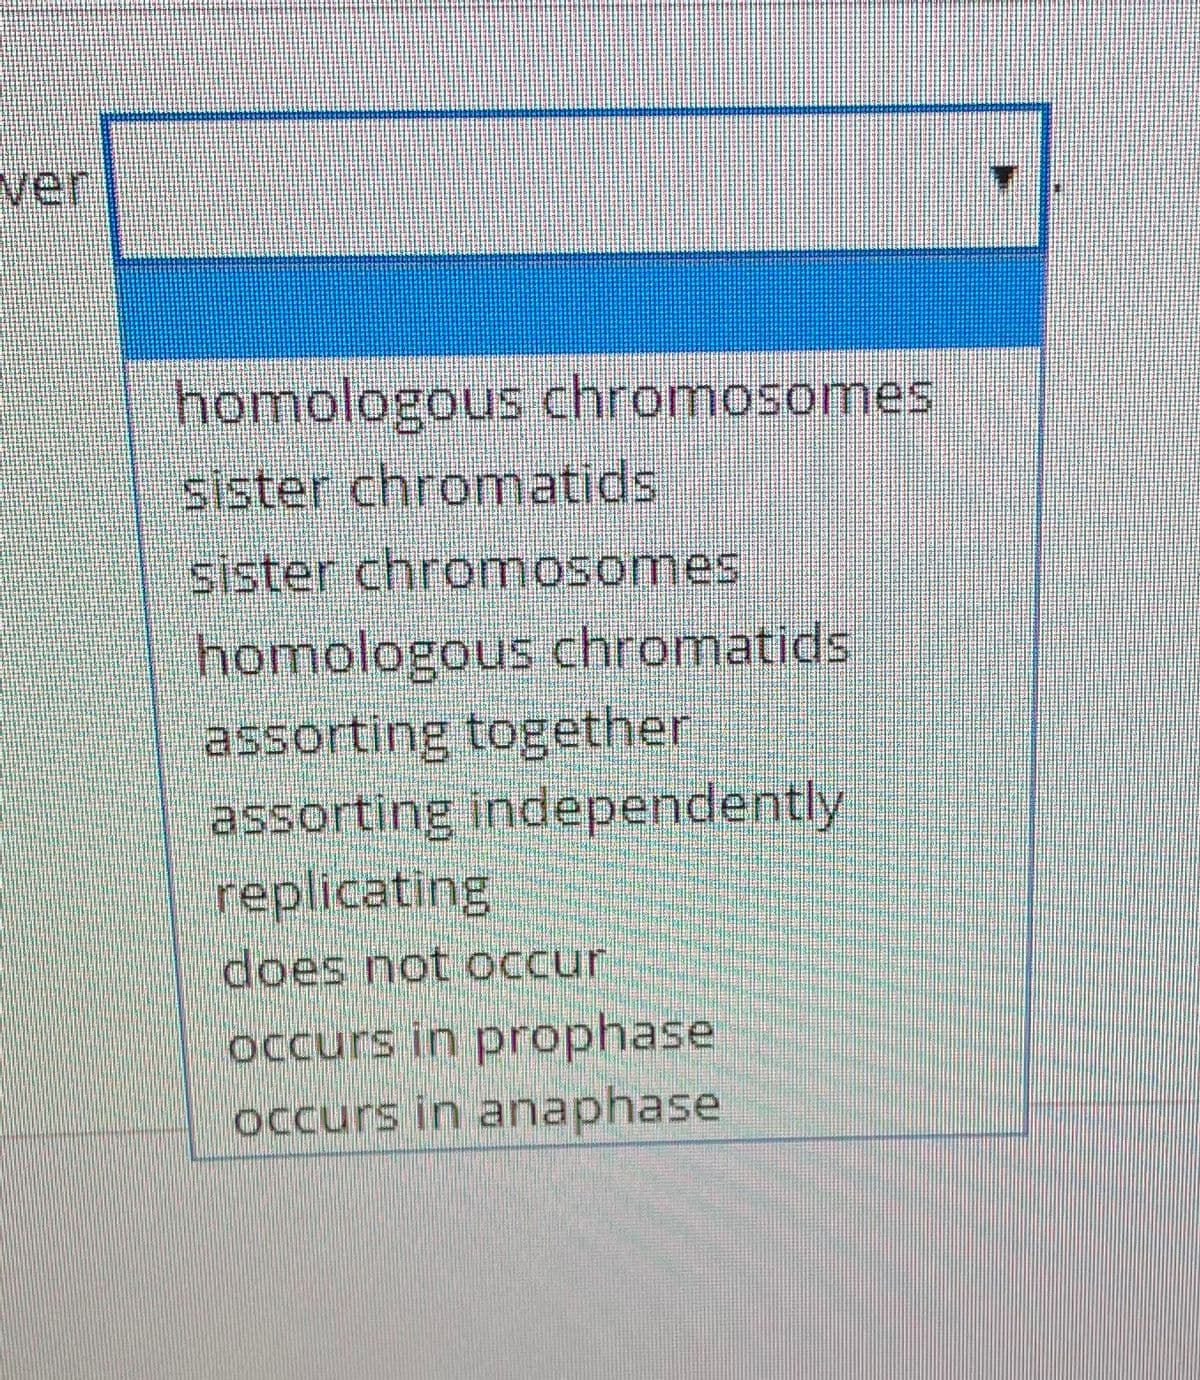 ver
homologous chromosomes
sister chromatids
sister chromosomes
homologous chromatids
assorting together
assorting independently
replicating
does not occur
occurs in prophase
occurs in anaphase
